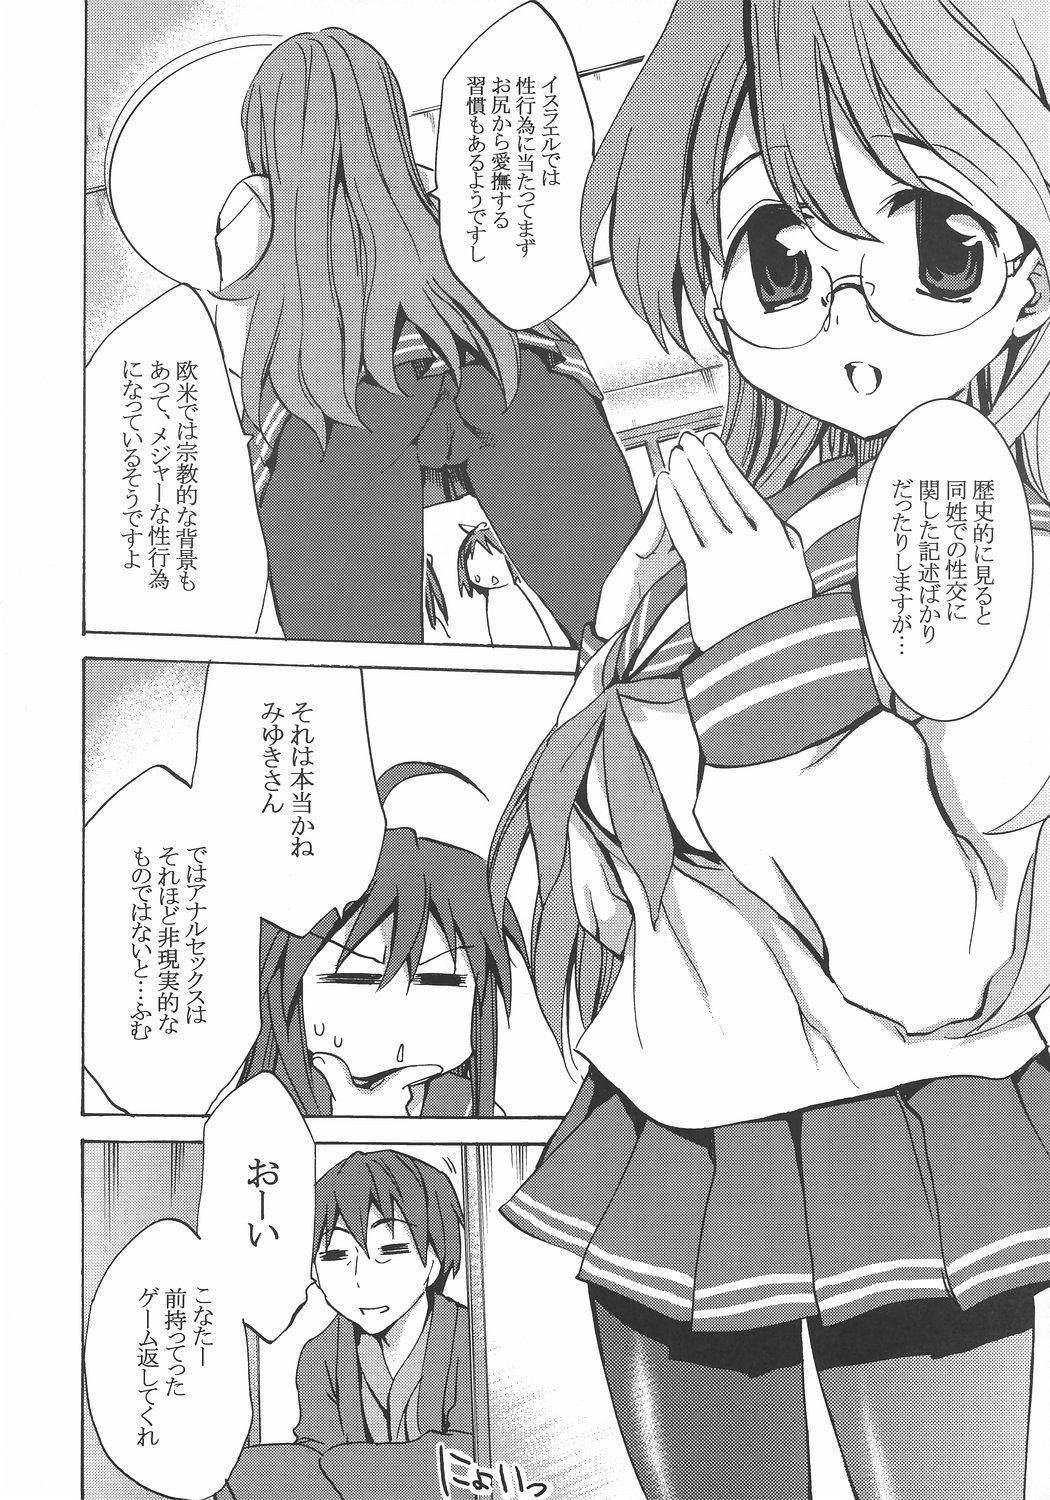 Ass Megane, Megane!! - Lucky star Goth - Page 7